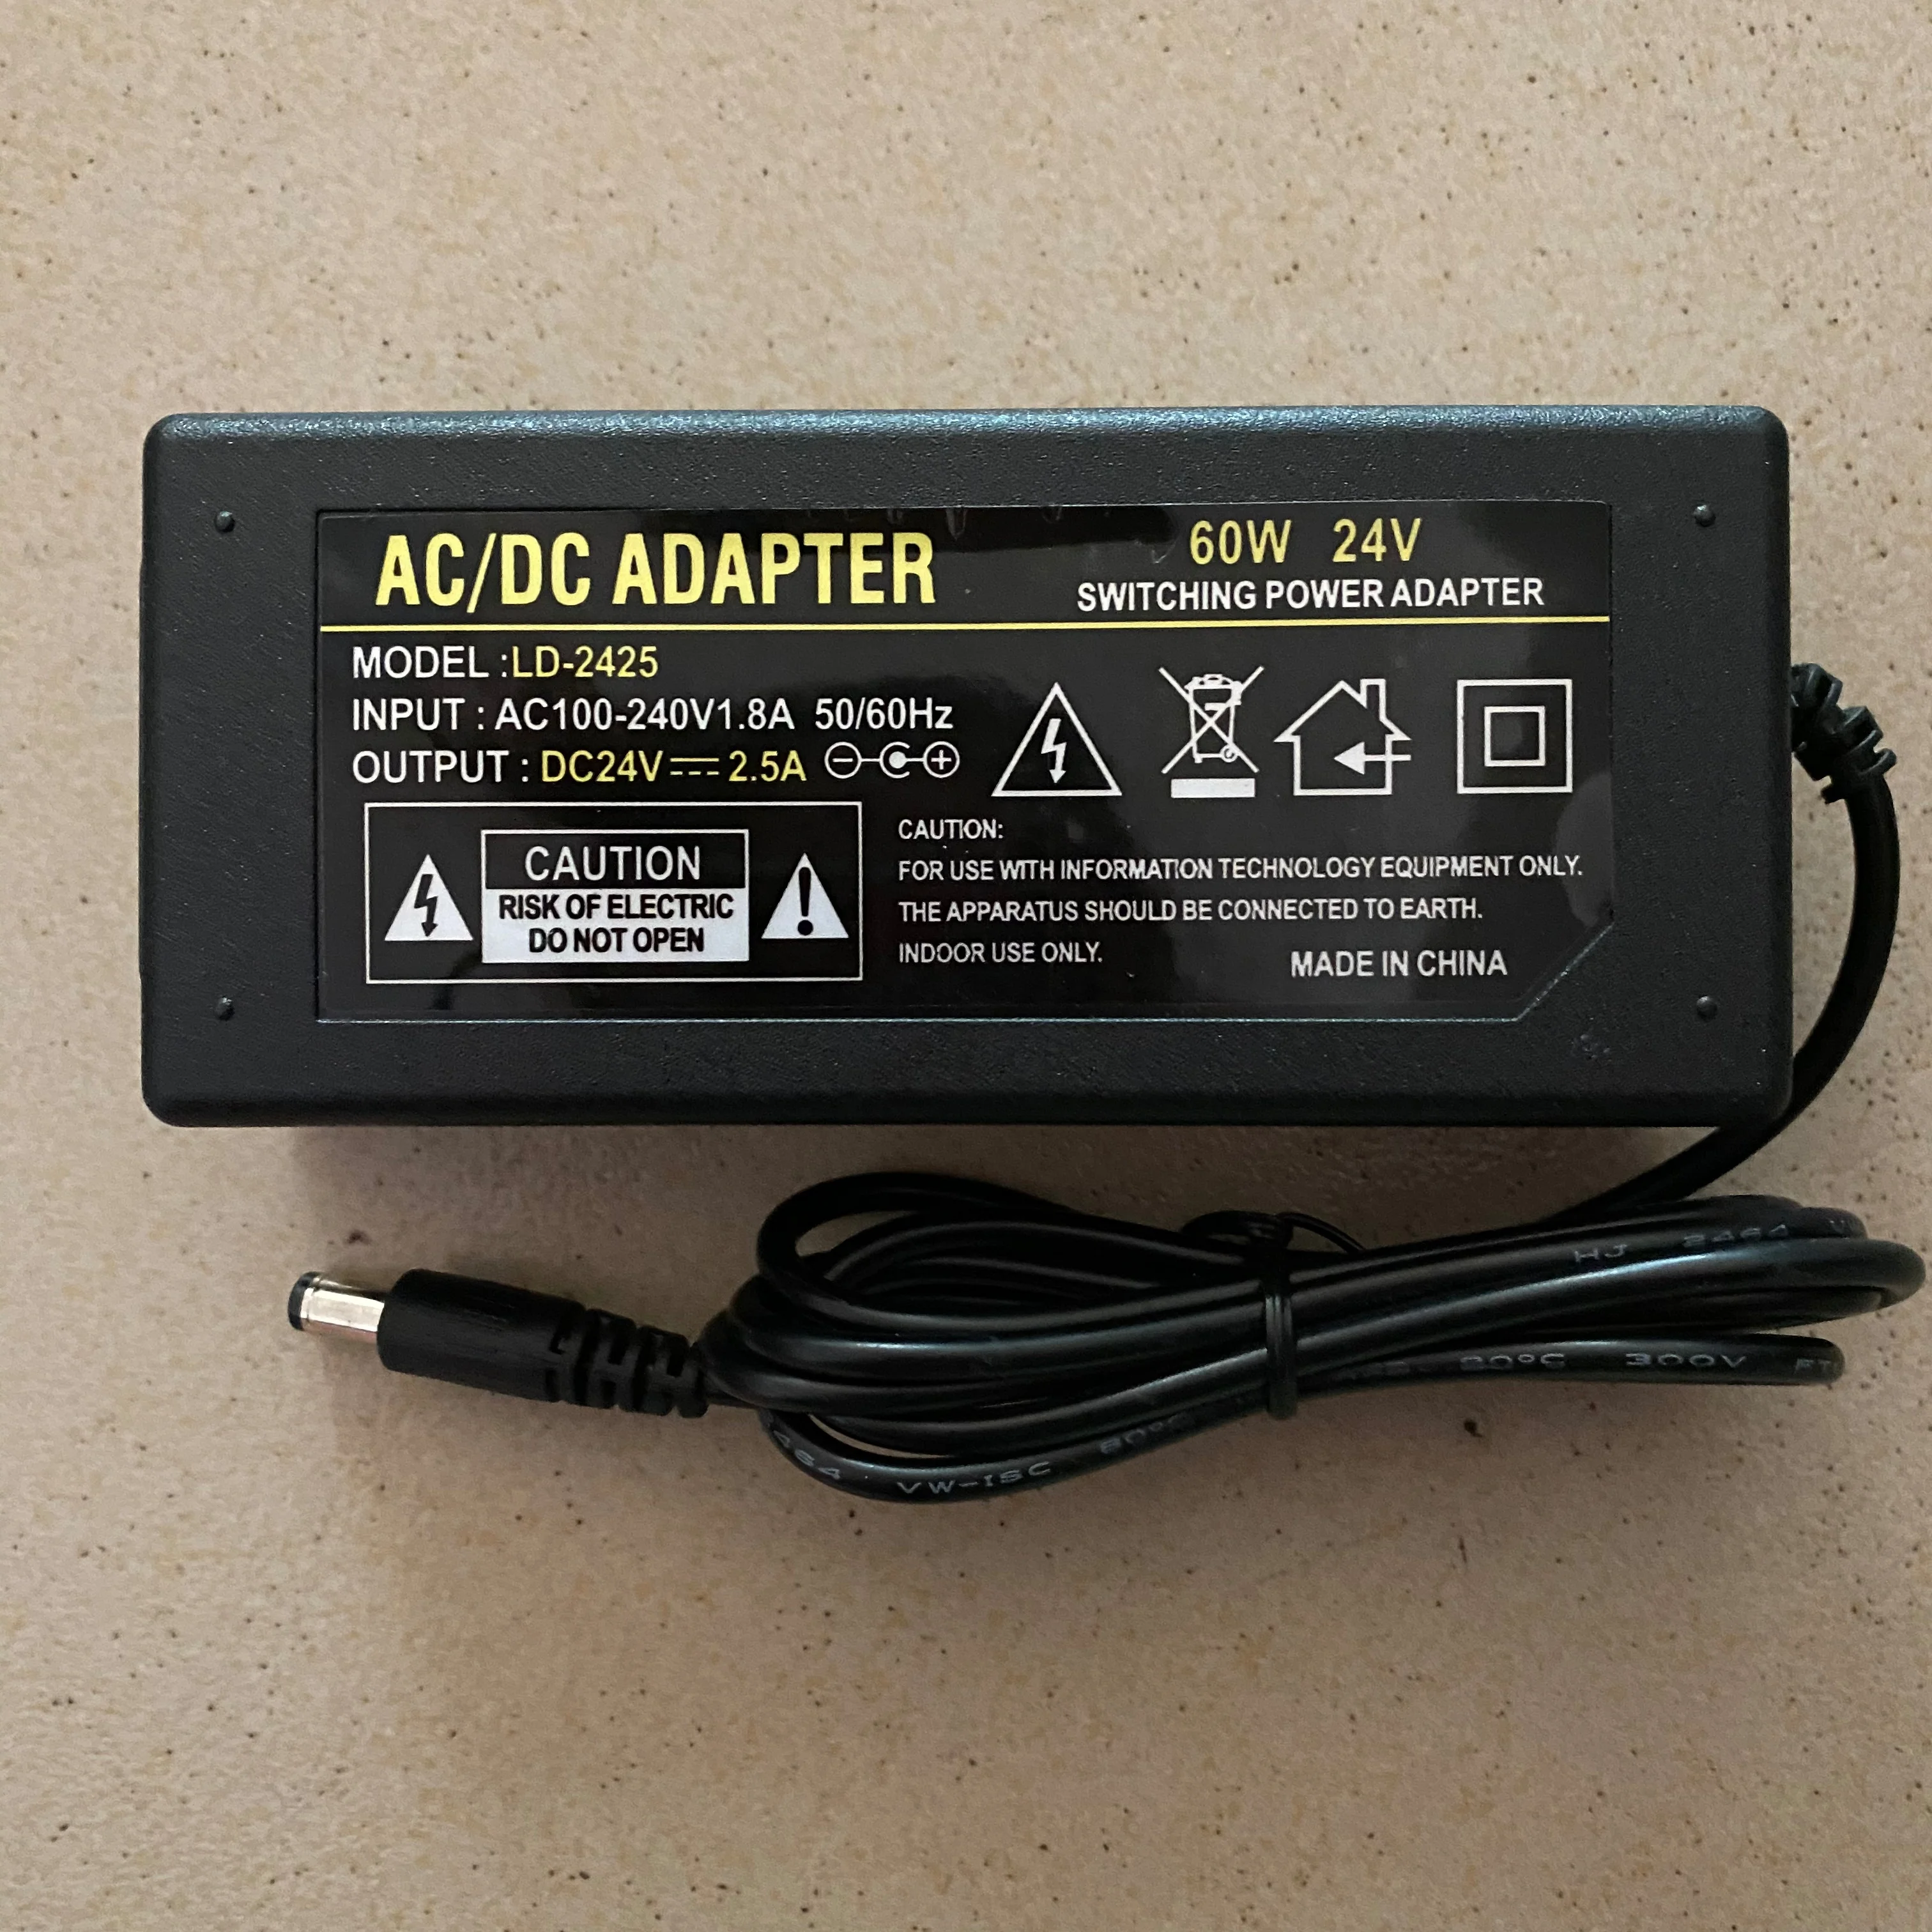 waterstof Antarctica seinpaal 24v 2.5a 60w Ac/dc Power Supply Charger 24 Volt 2.5 Amp Adaptor For Zebra  Printer Power Adapter - Buy 24v 2.5a Power Supply,Printer Power  Adapter,Ac/dc Power Supply Product on Alibaba.com